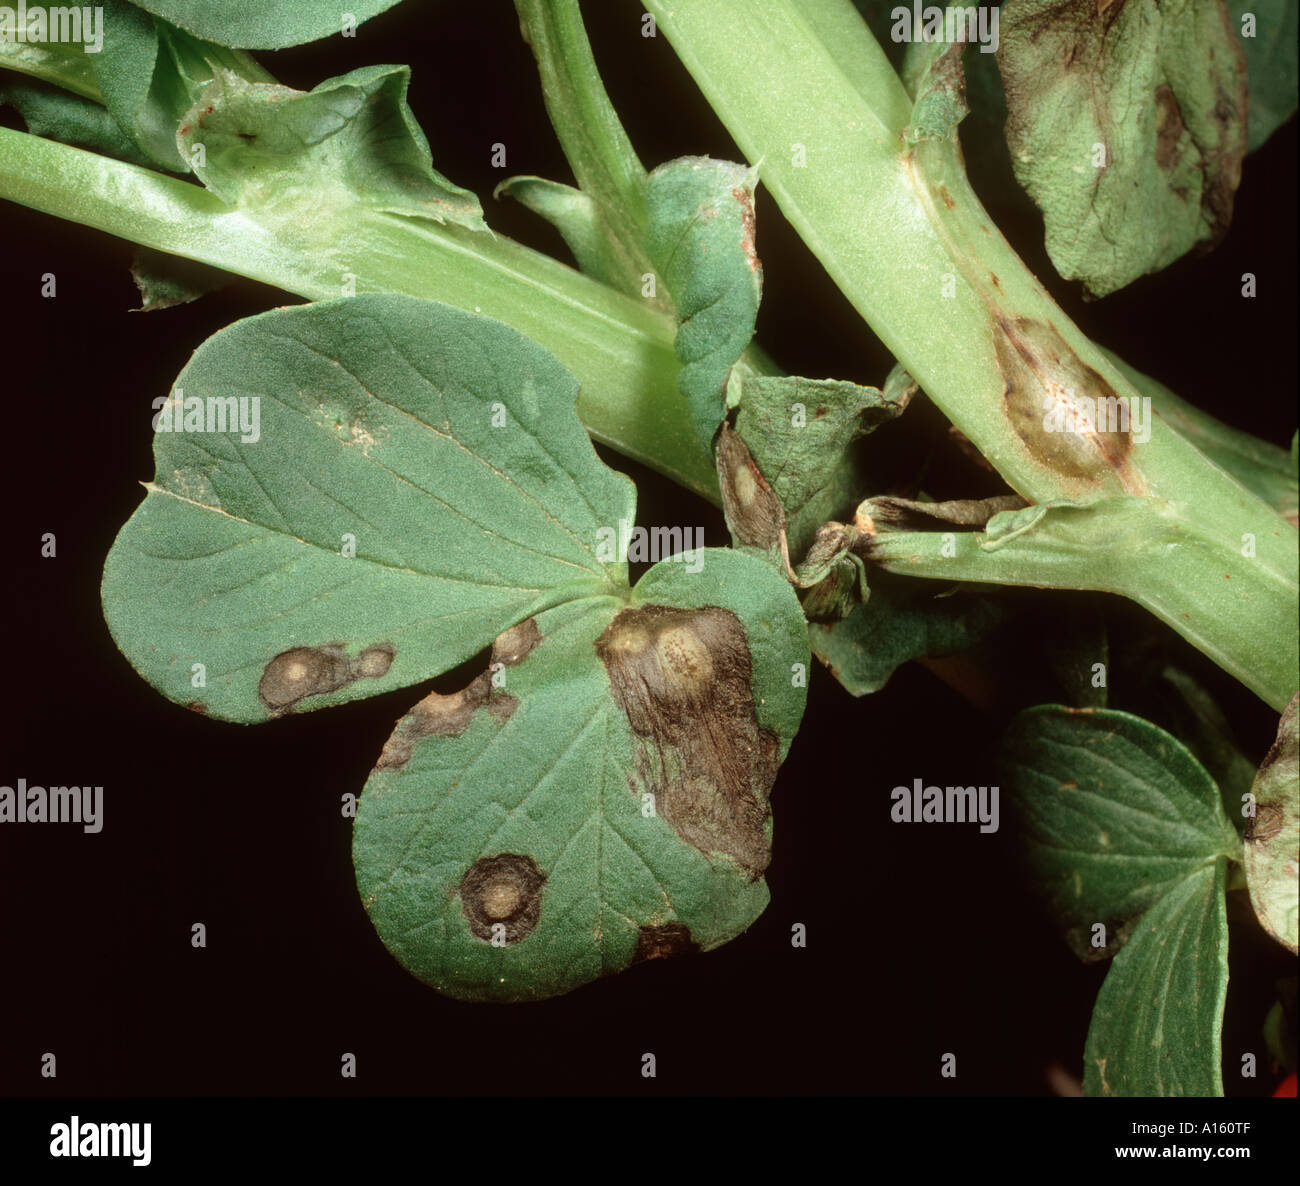 Ascochyta leaf spot (Ascochyta fabae) lesions on field bean leaves stem Stock Photo